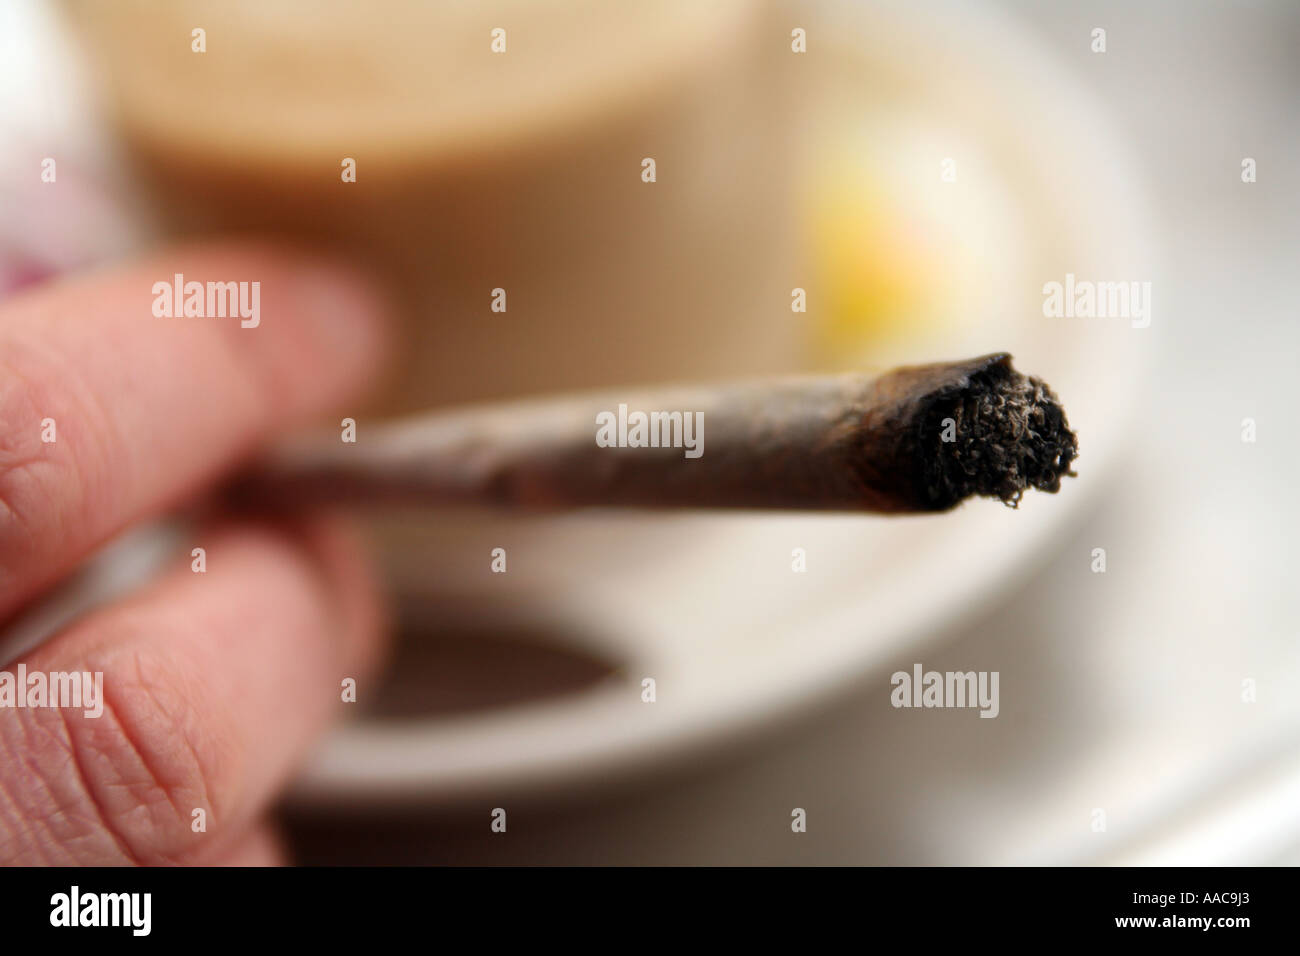 young woman smoking marijuana in a coffee shop in holland, centre frame, close up Stock Photo